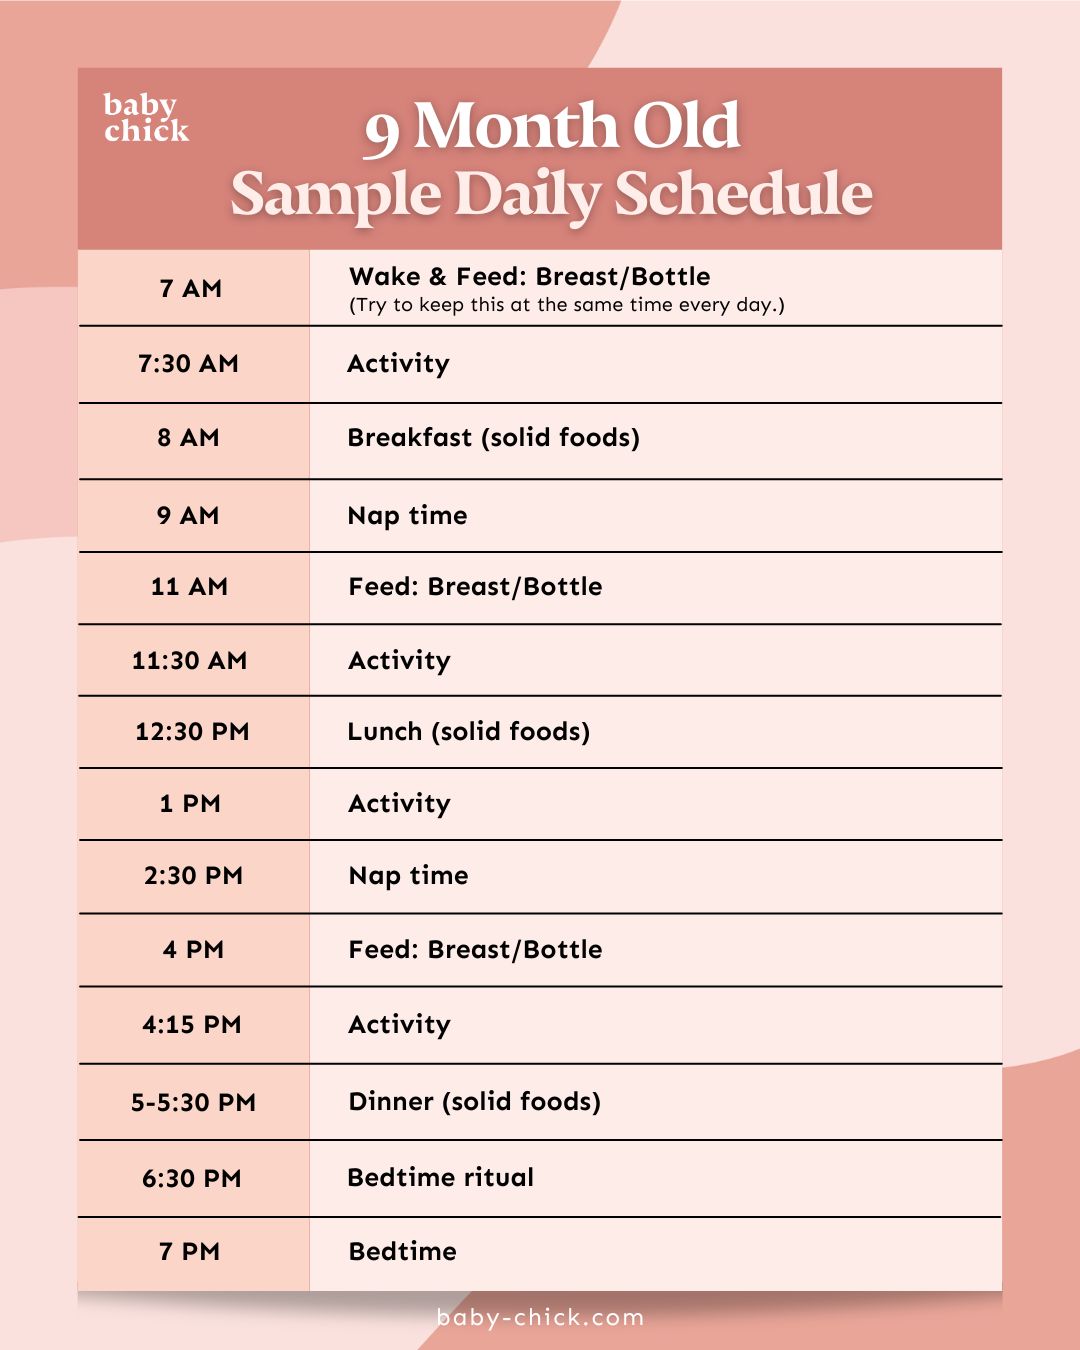 9 month old sample daily schedule